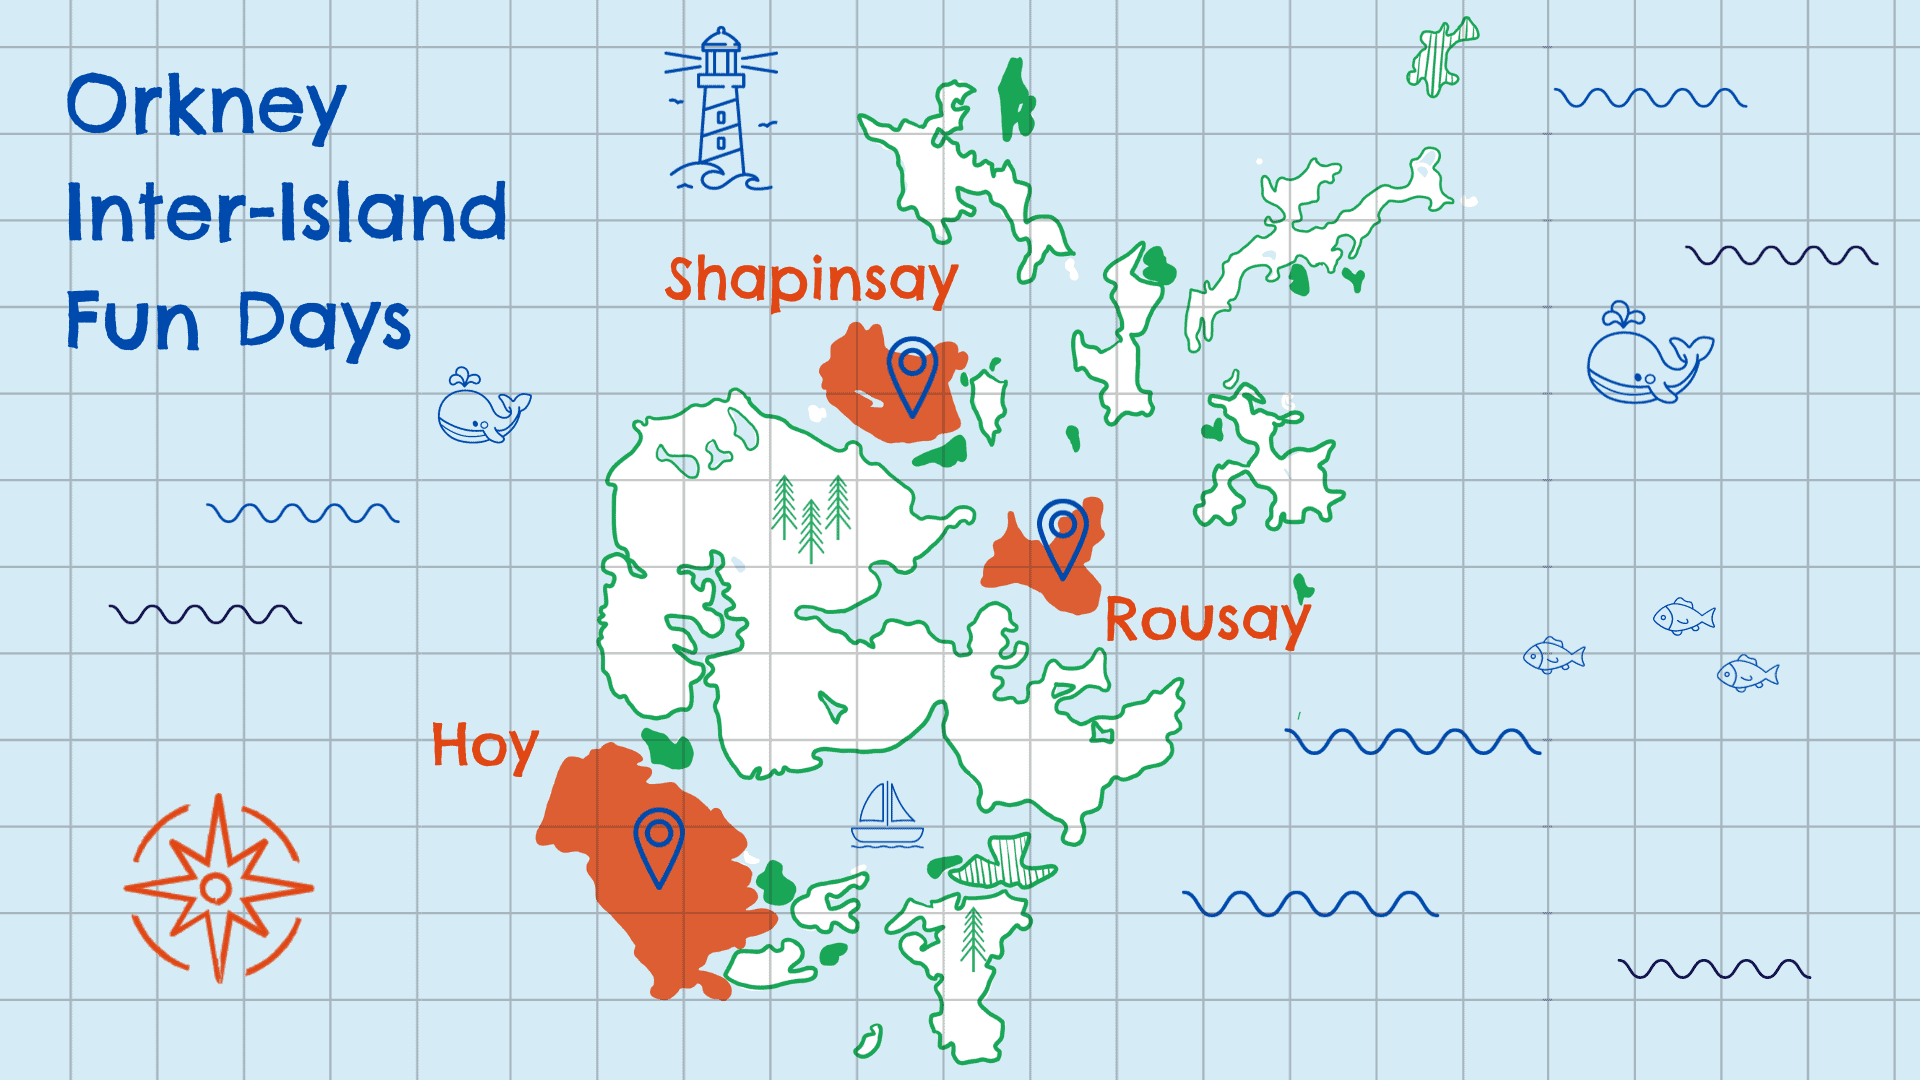 Animated map of the Orkney islands highlighting Rousay, Shapinsay and Hoy.